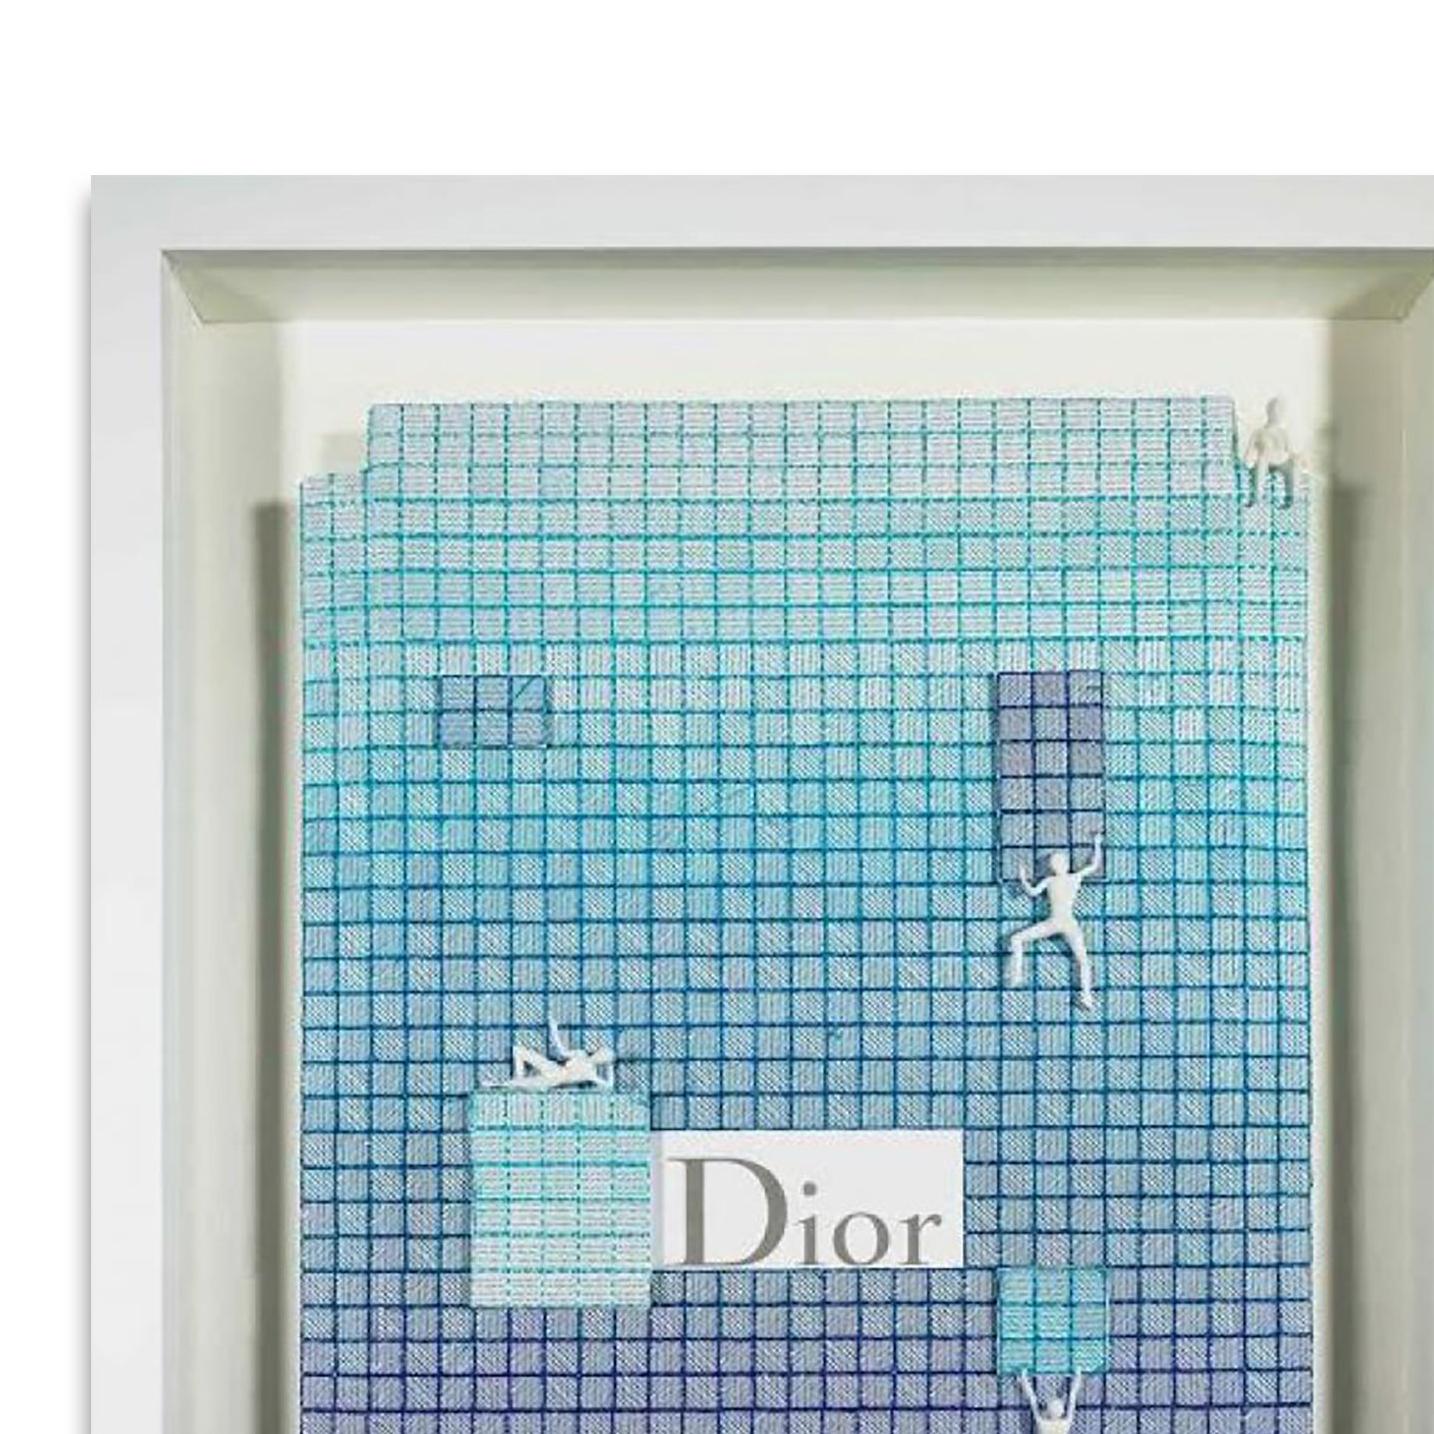 Dior Azure by artist Stephen Wilson is a blue and white contemporary luxury design mixed media piece that measures 31 x 21 and is priced at $4000.00

Stephen Wilson
Born and raised in Hoboken, New Jersey, Stephen Wilson is a conceptual artist whose